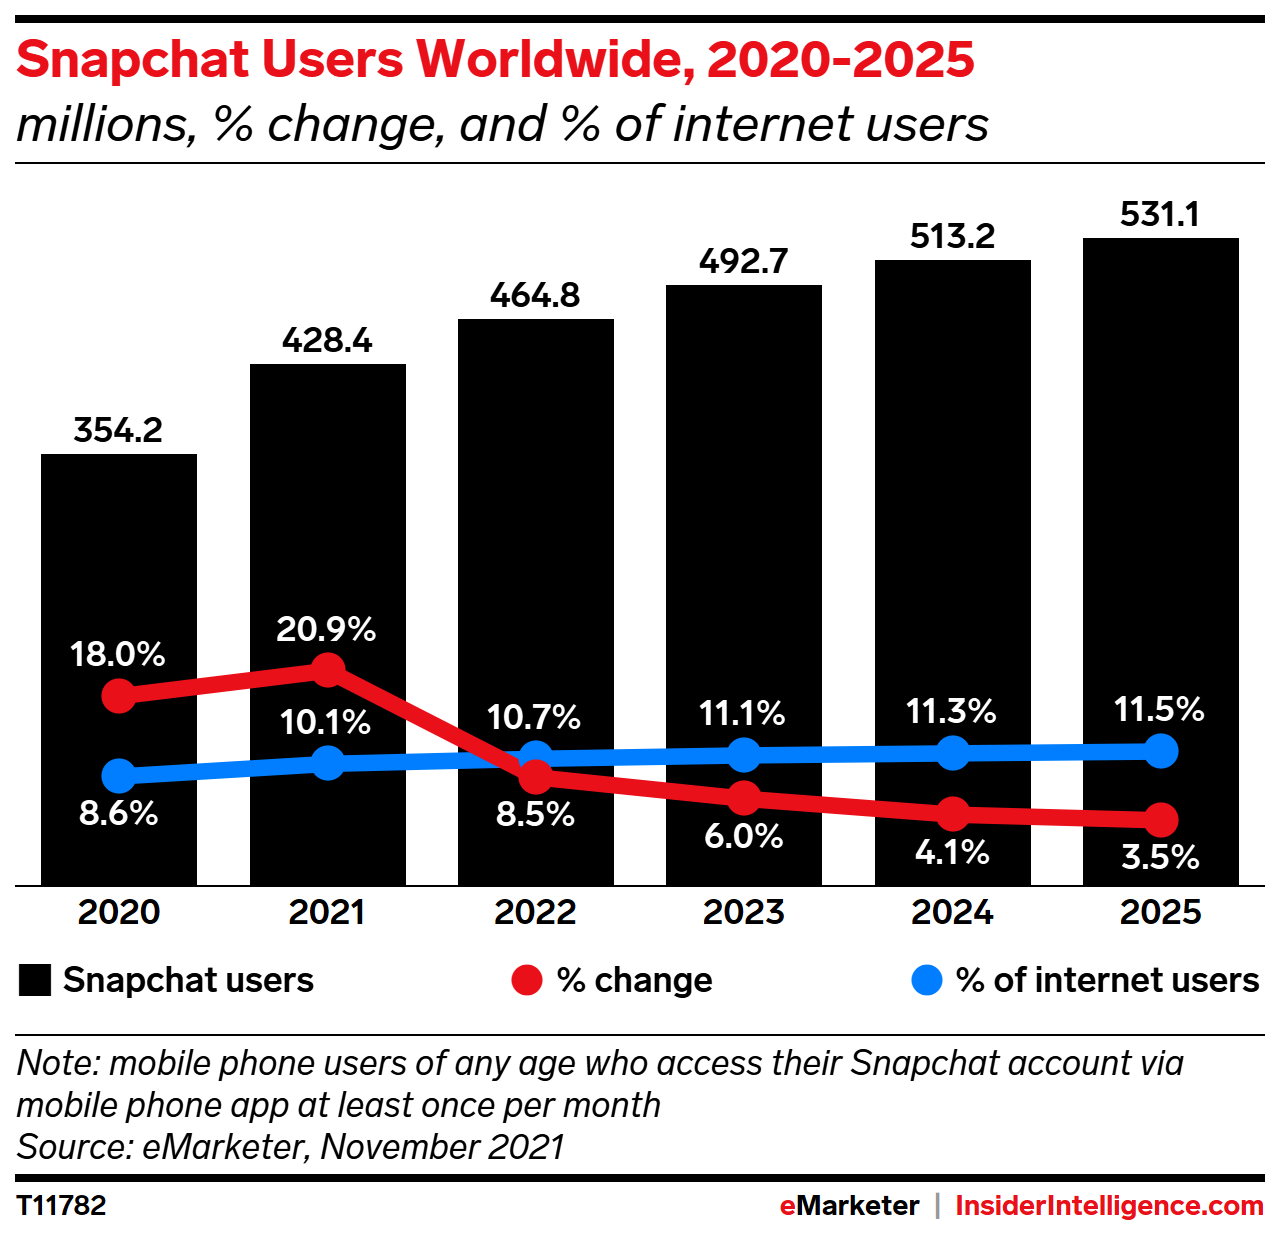 Snapchat Users Worldwide, 2020-2025 (millions, % change, and % of internet users)